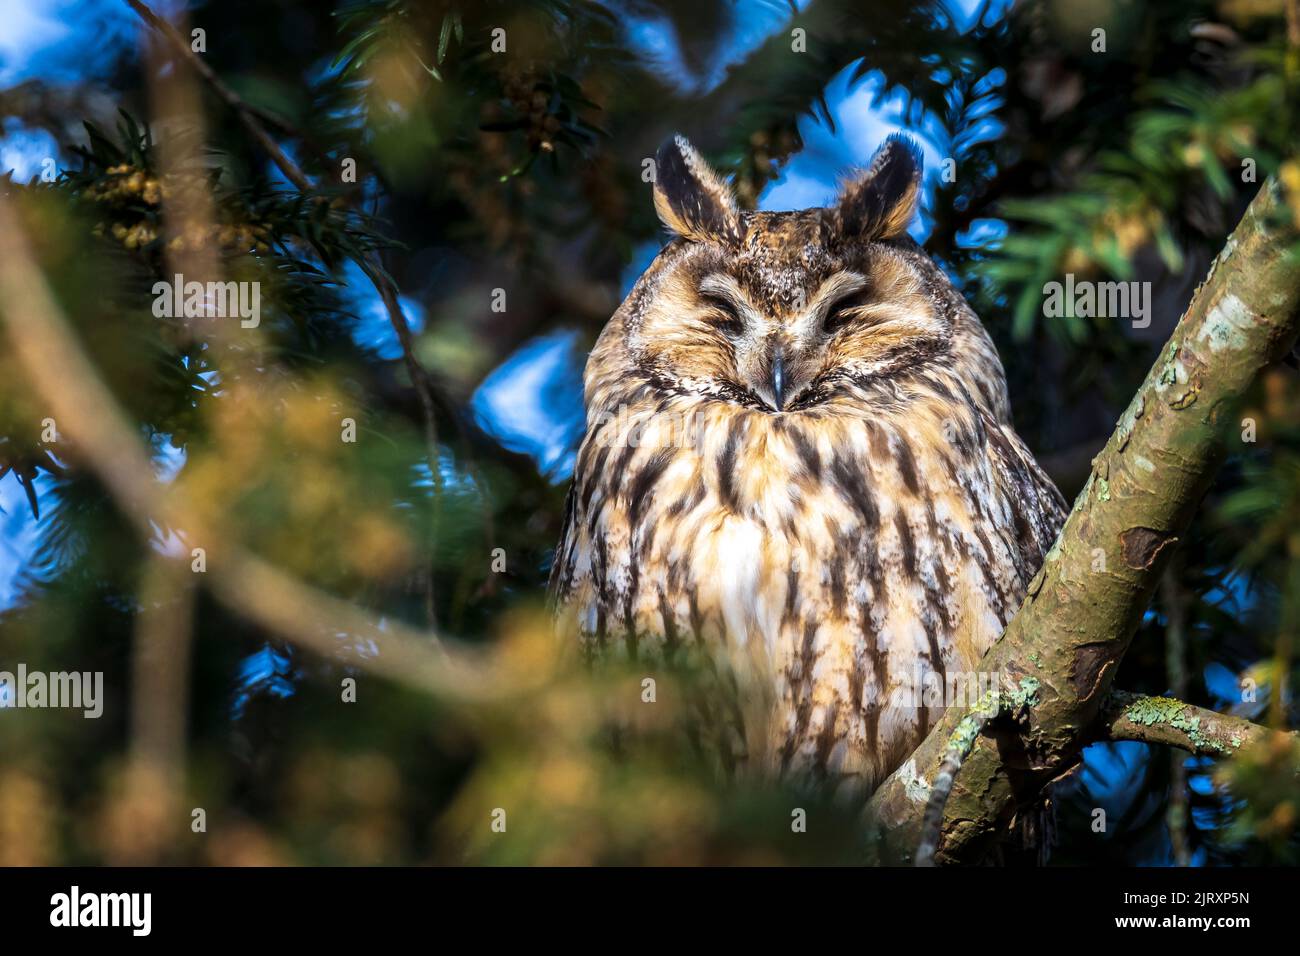 Long eared owl, Asio otus, bird of prey perched and resting in a tree in winter daytime colors facing camera. Stock Photo